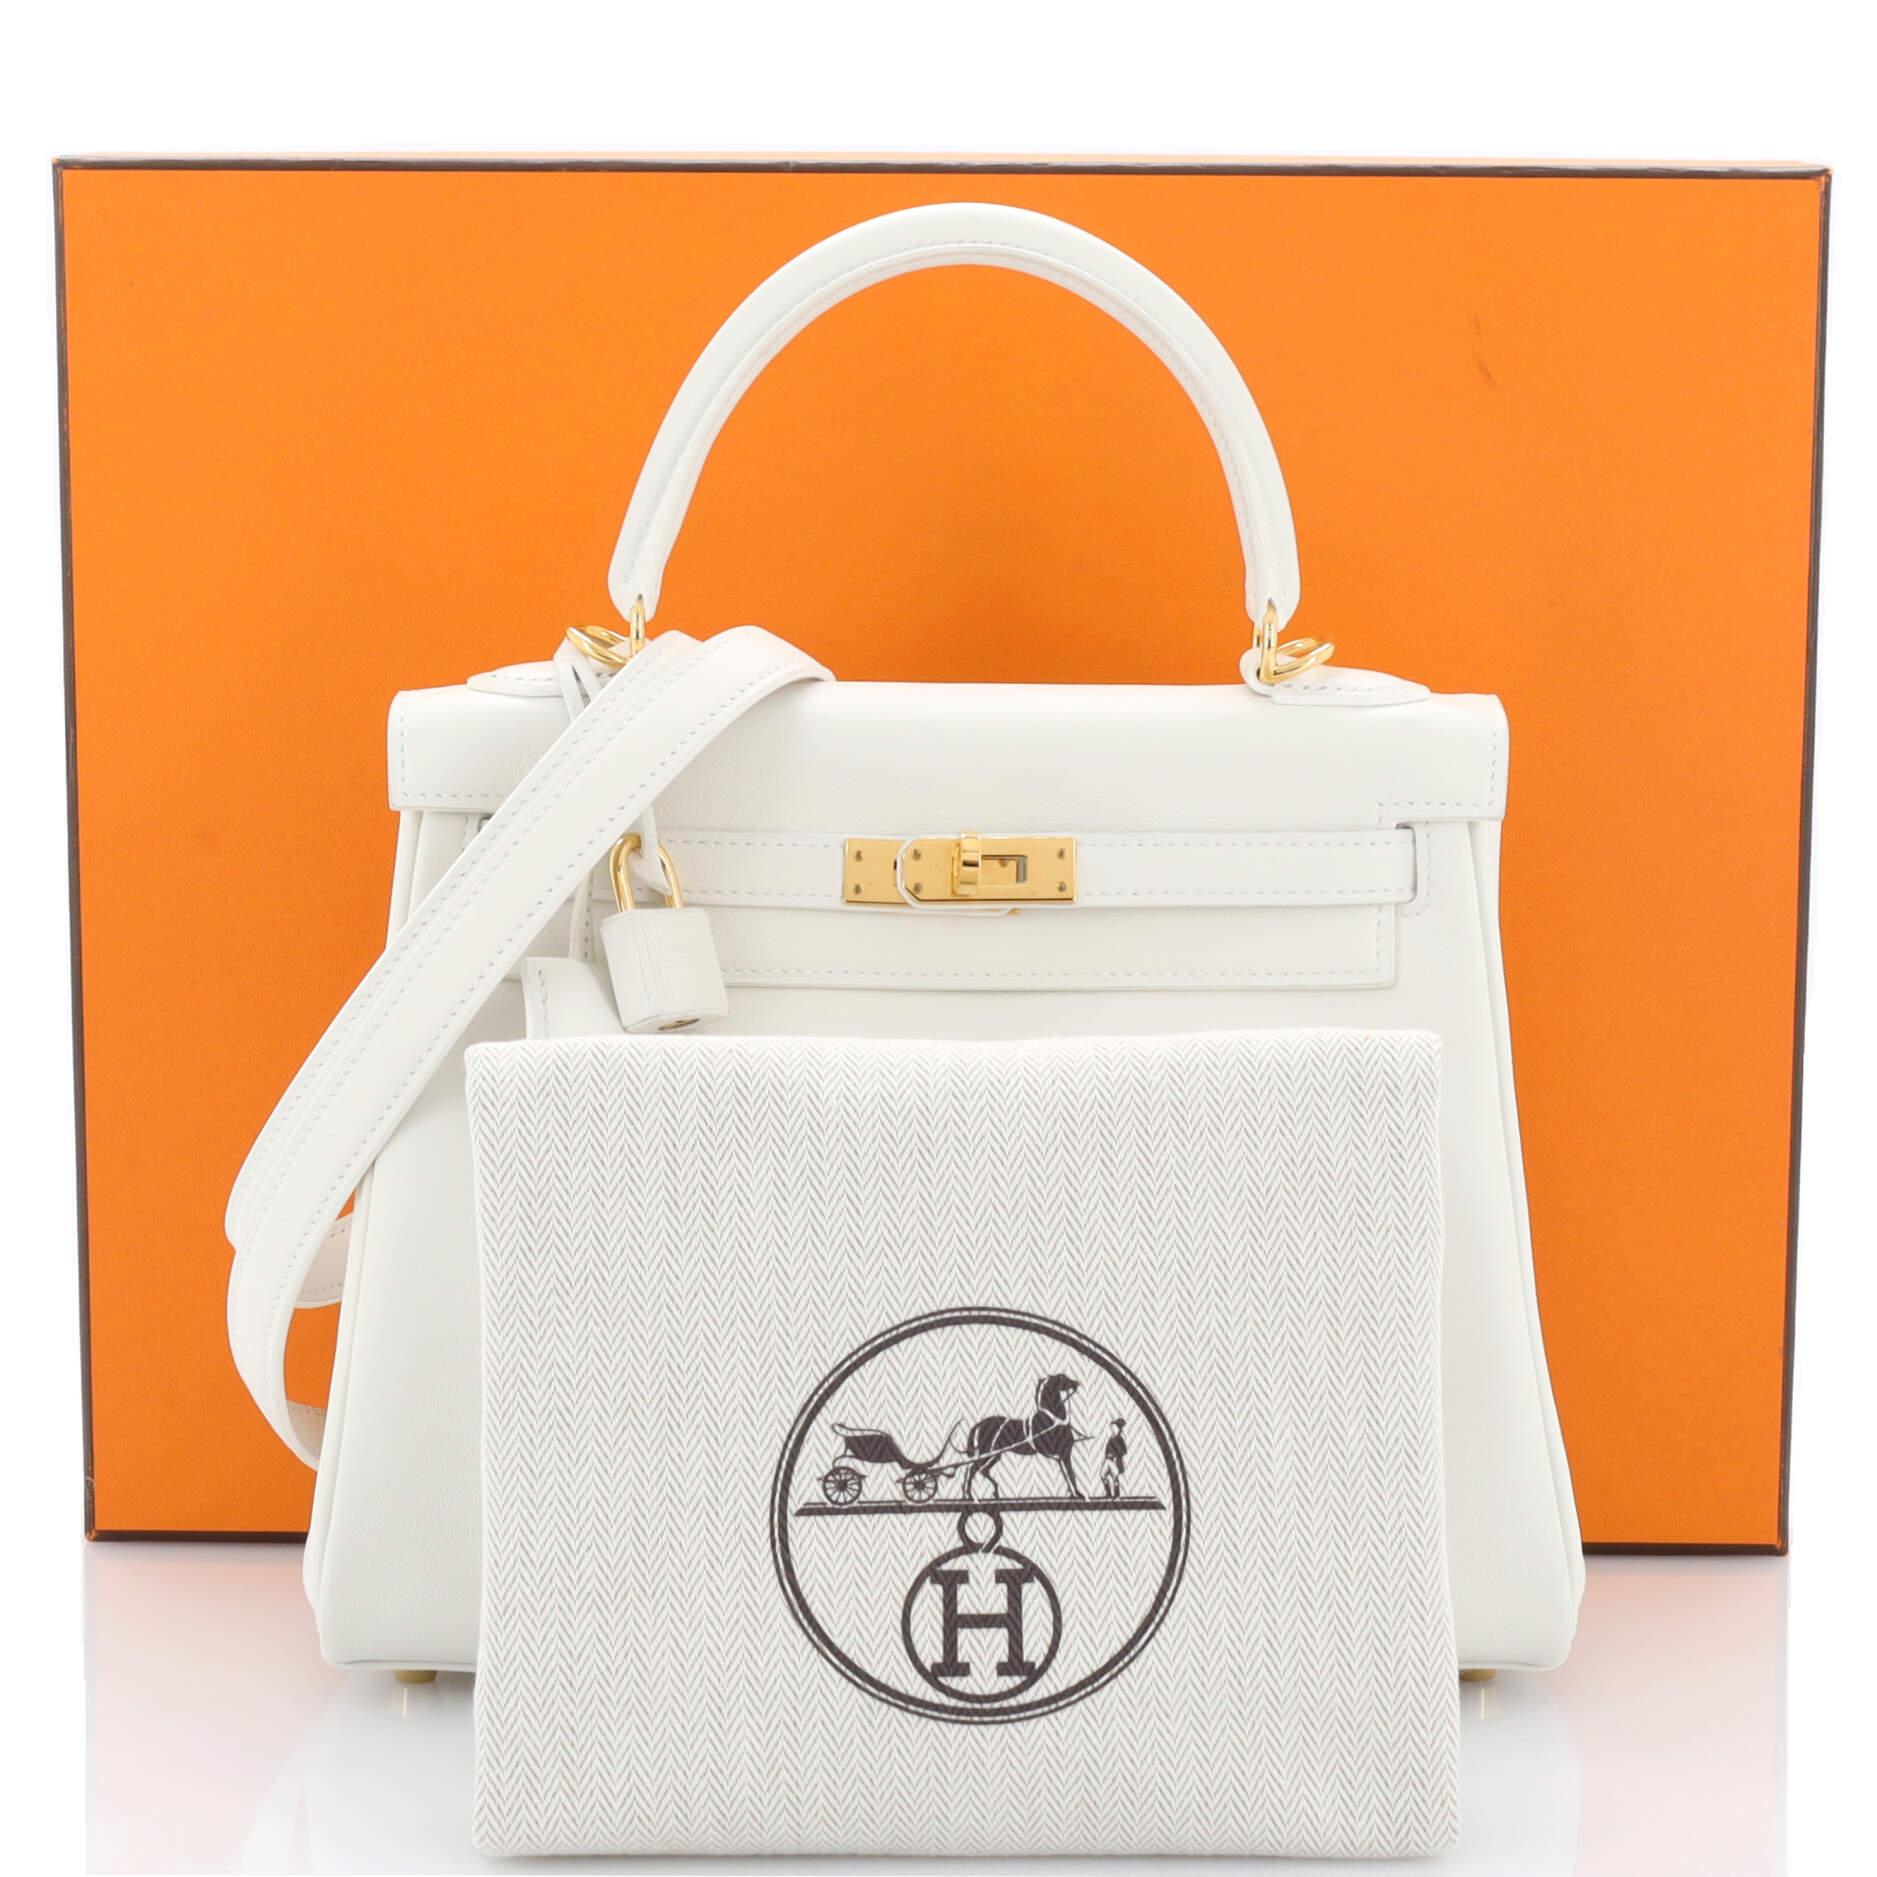 Painted Hermes Kelly - 6 For Sale on 1stDibs